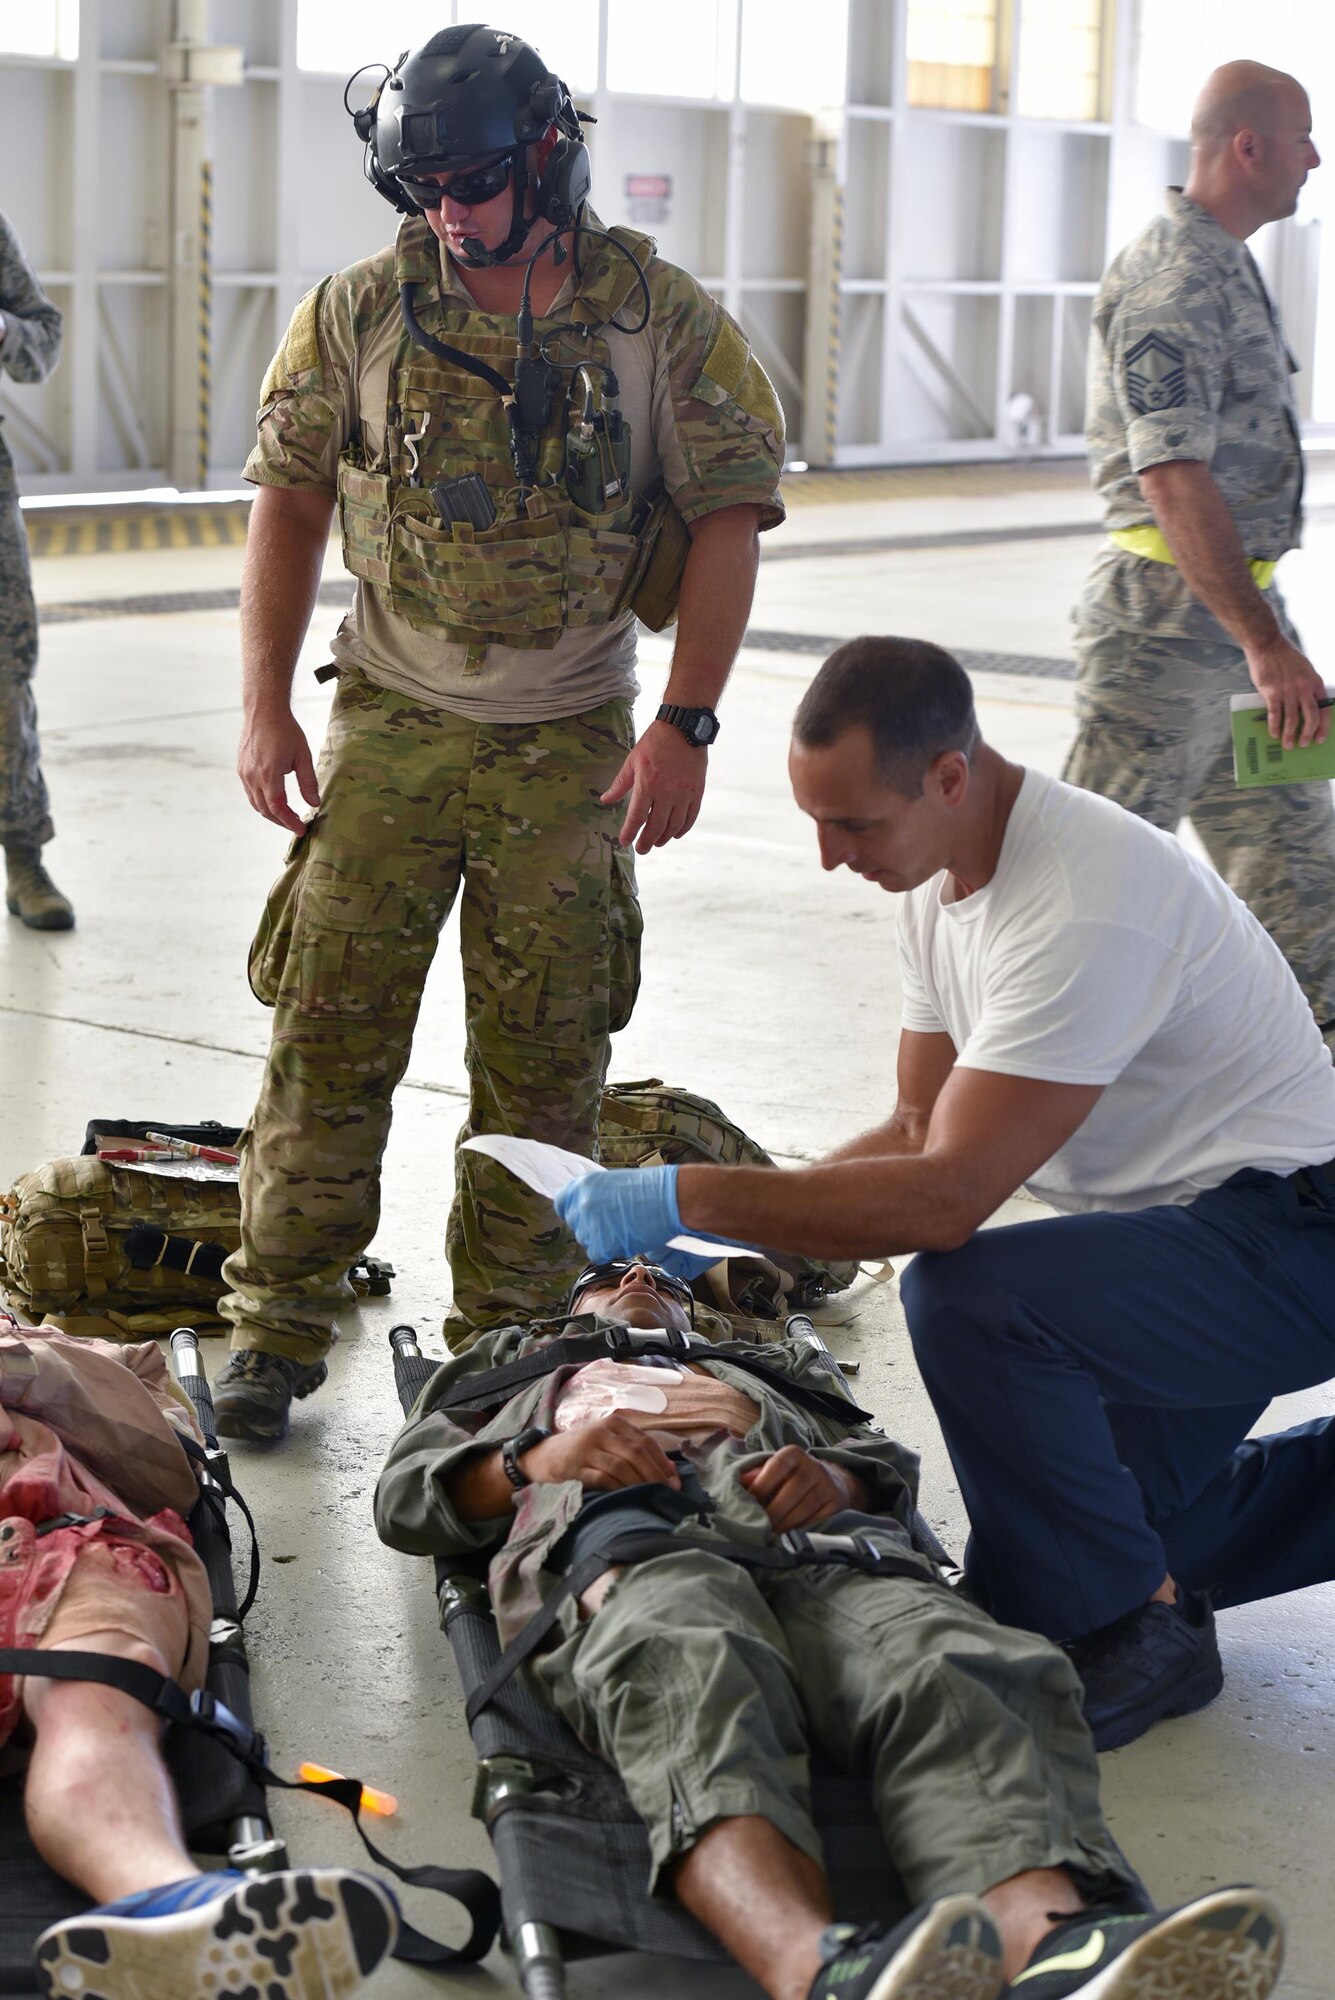 Matthew Martines, right, 45th Civil Engineer Squadron firefighter, receives a status update on a victim of an active shooter exercise, upon arriving on scene from Master Sgt. Louis Hause, 308th Rescue Squadron pararescueman, July 25, 2017 in Hangar 750. Pararescuemen worked closely with installation firefighters to tend to victims on scene and load them into ambulances for transport to the hospital. The joint exercise between the 920th Rescue Wing and 45th Space Wing tested the units’ ability to work together in an emergency situation. (U.S. Air Force photo/Tech. Sgt. Lindsey Maurice)